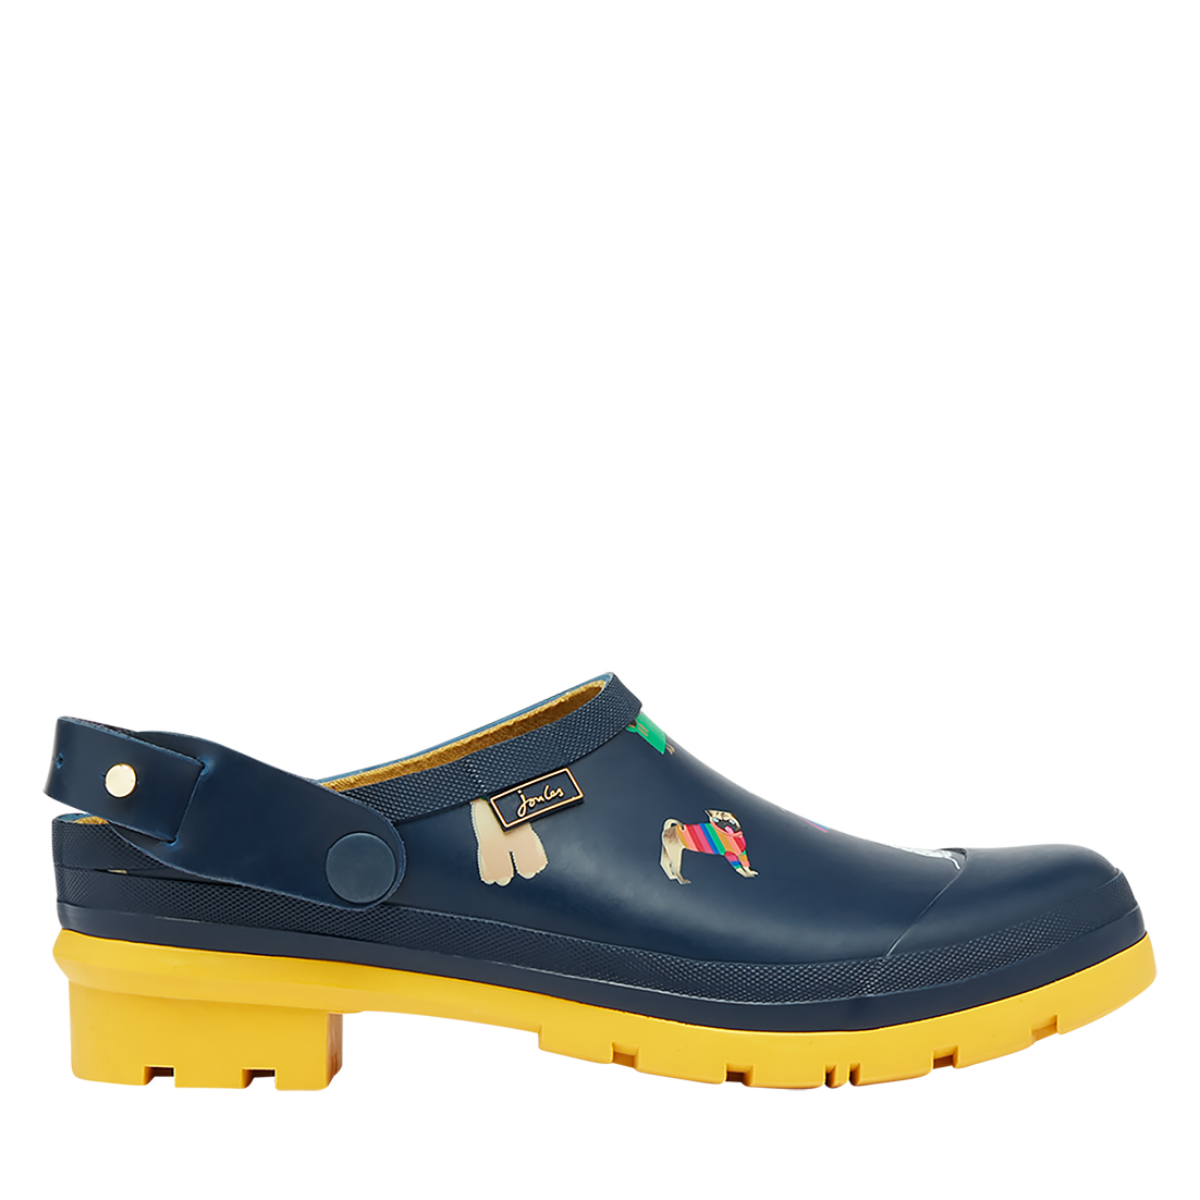 Joules Women's Welly Clog with Back Strap | Navy Rainbow Dog